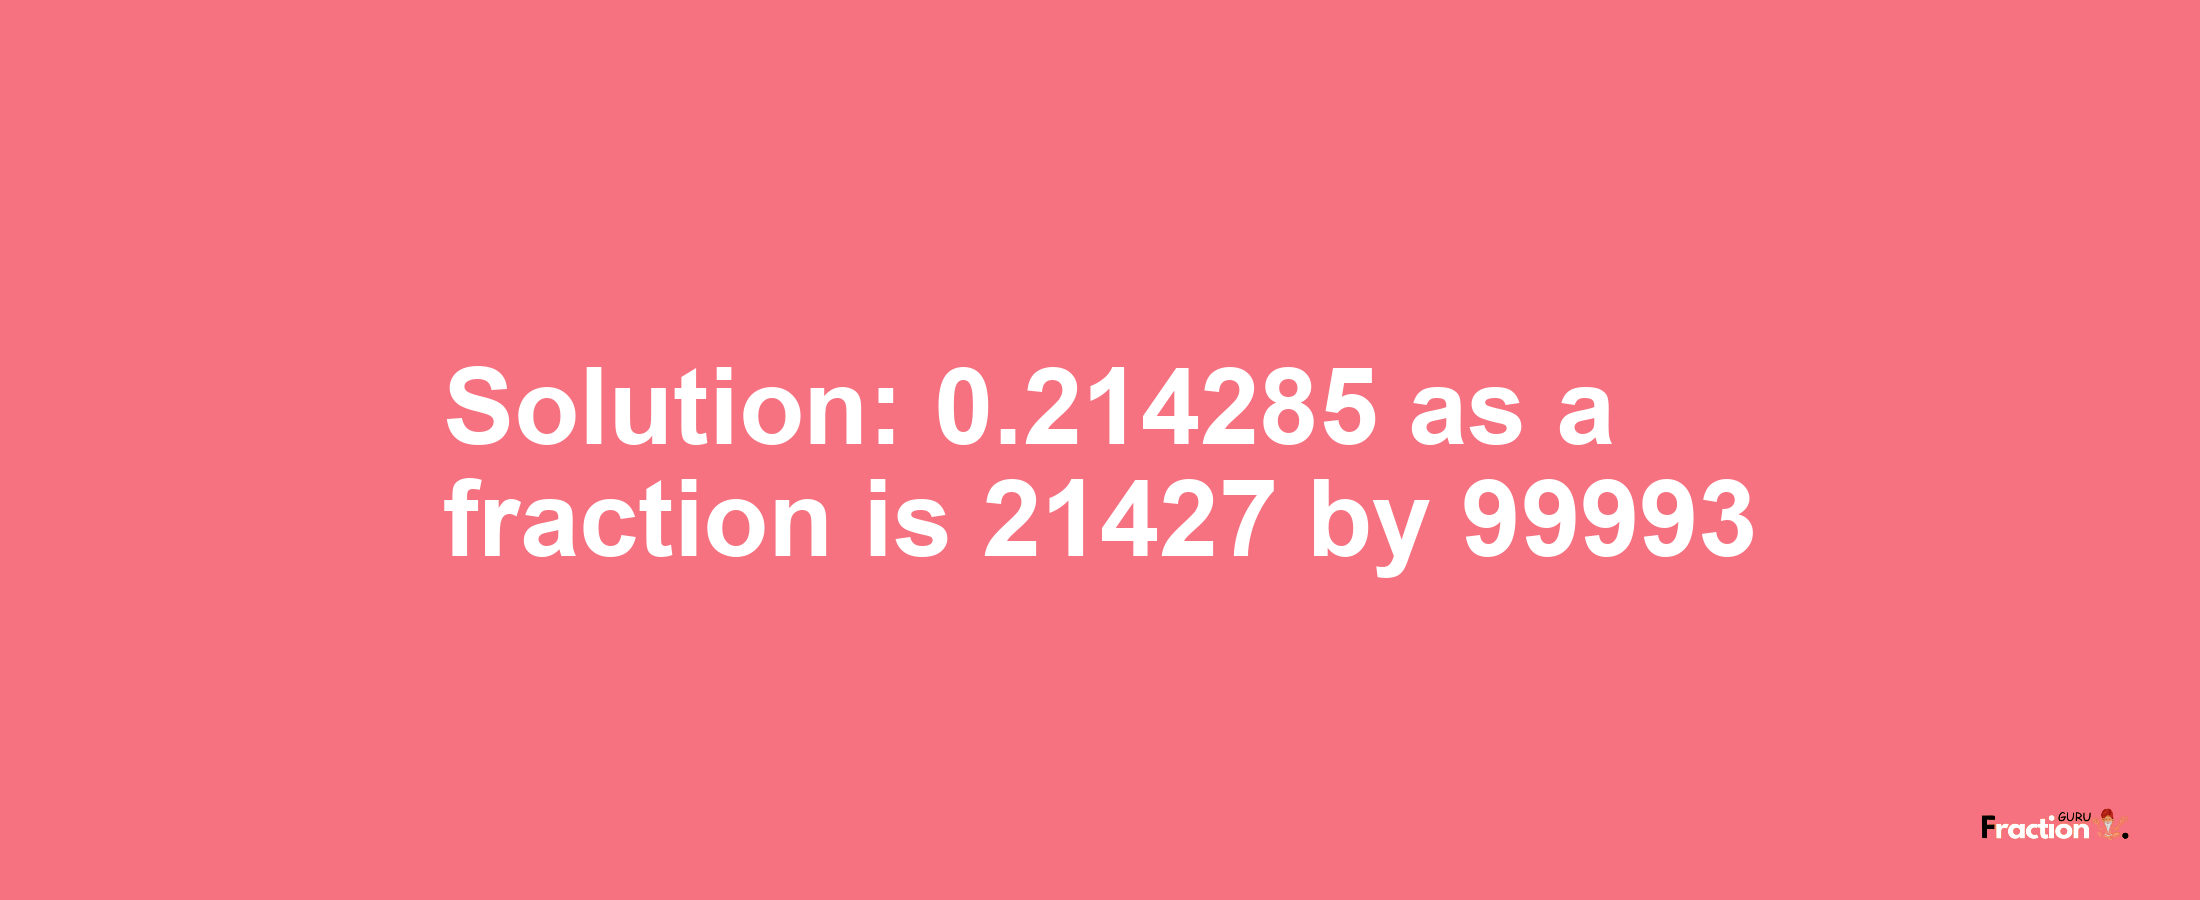 Solution:0.214285 as a fraction is 21427/99993